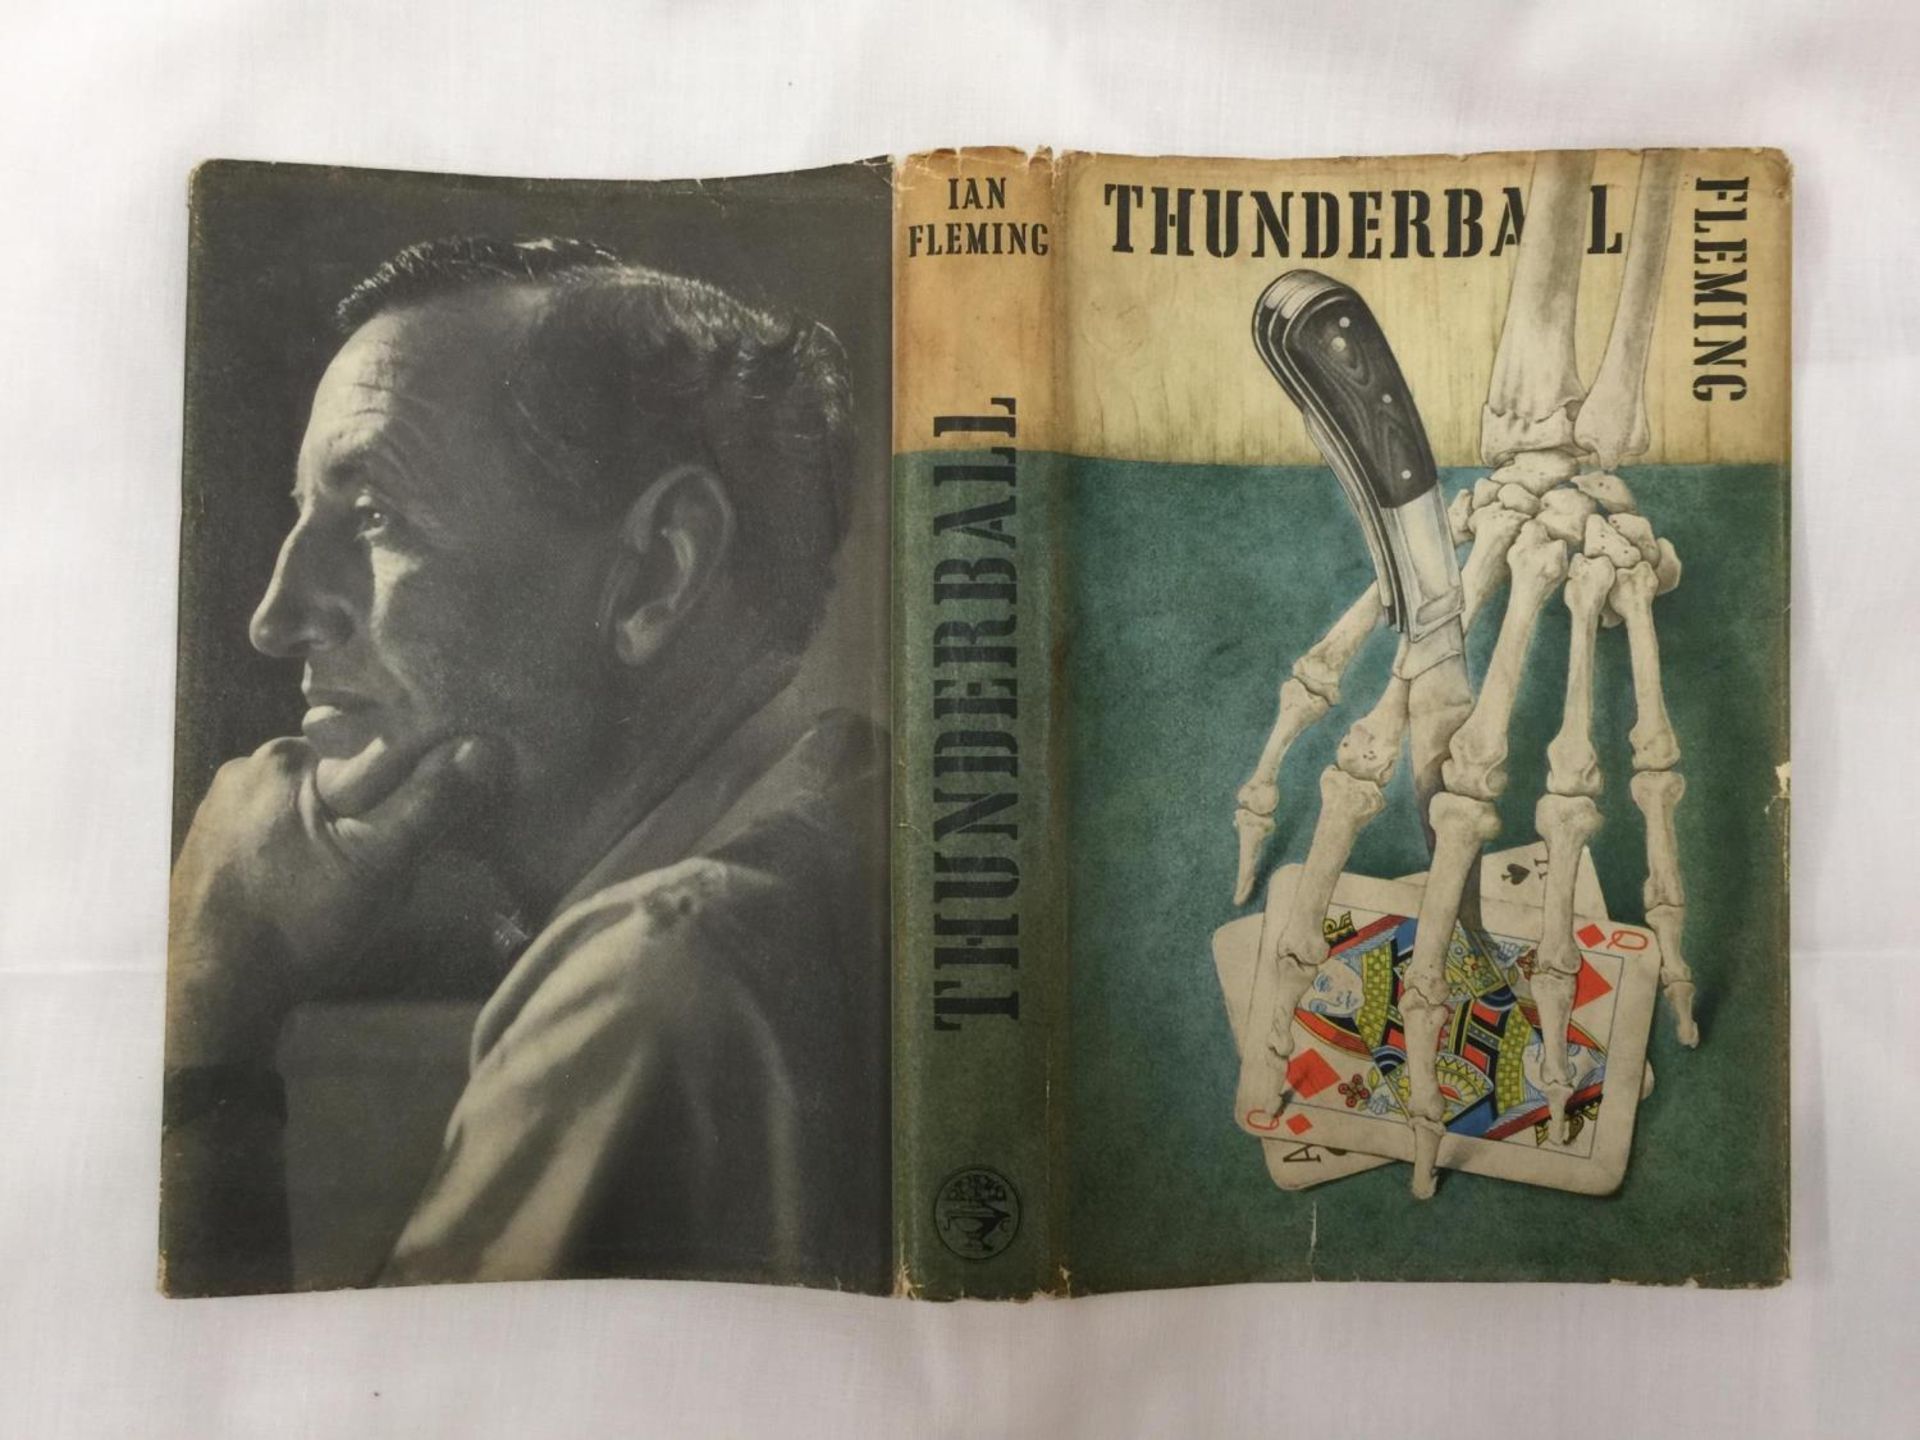 A FIRST EDITION JAMES BOND NOVEL - THUNDERBALL BY IAN FLEMING, HARDBACK WITH ORIGINAL DUST - Image 4 of 10